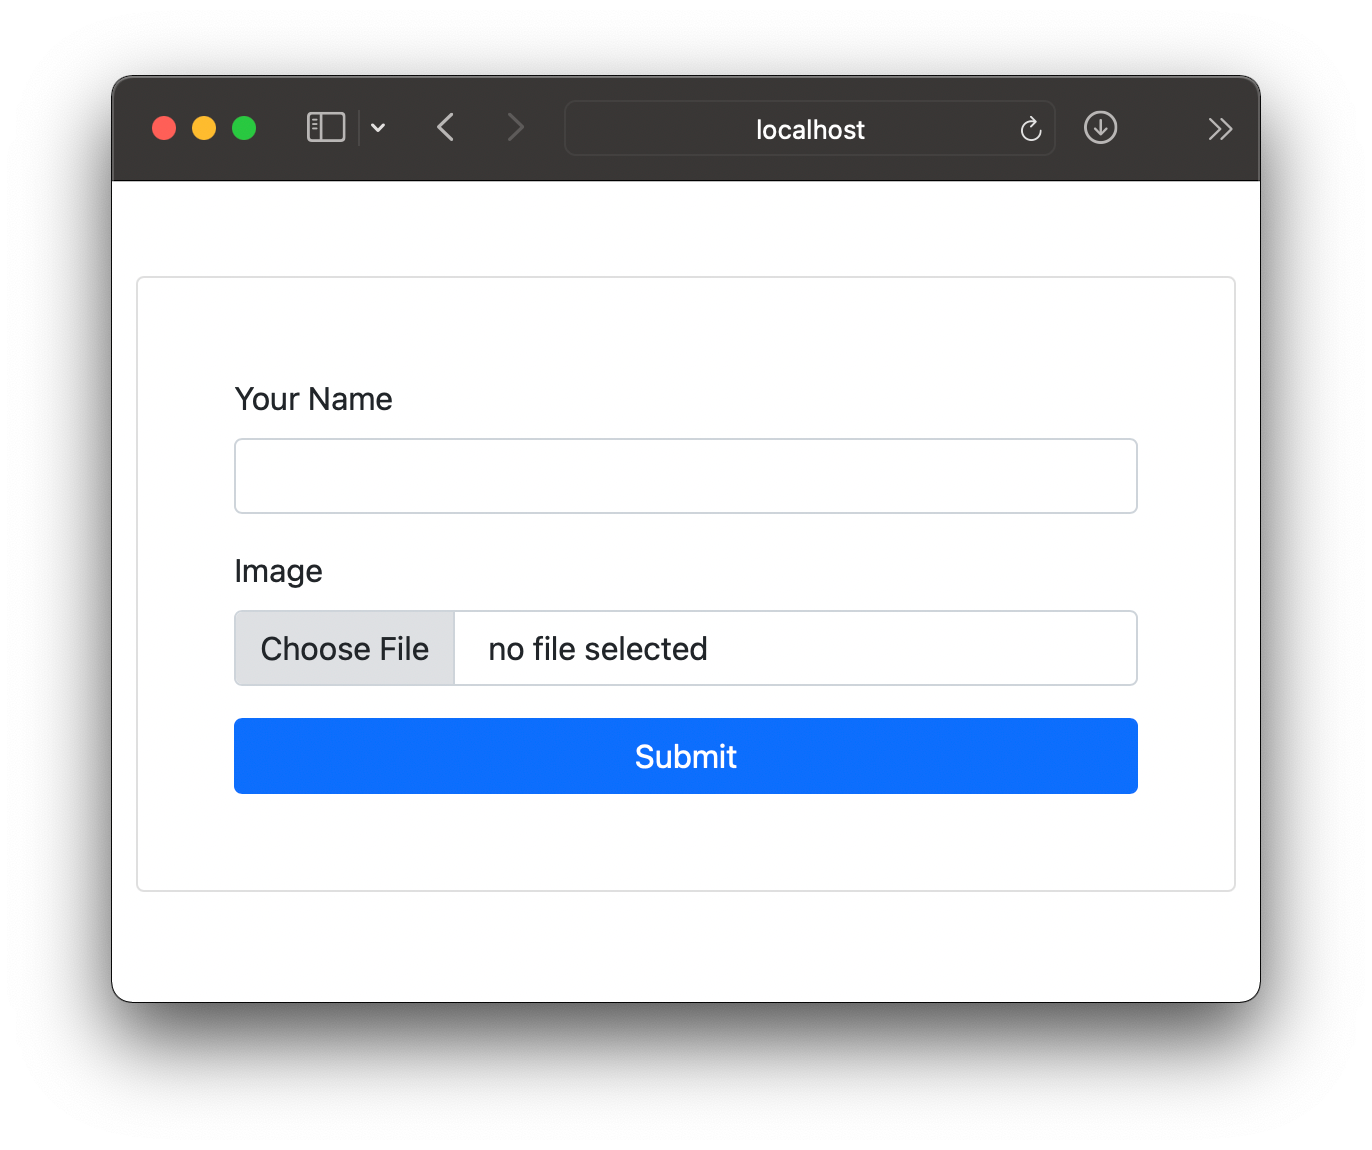 How to handle file upload in Expressjs